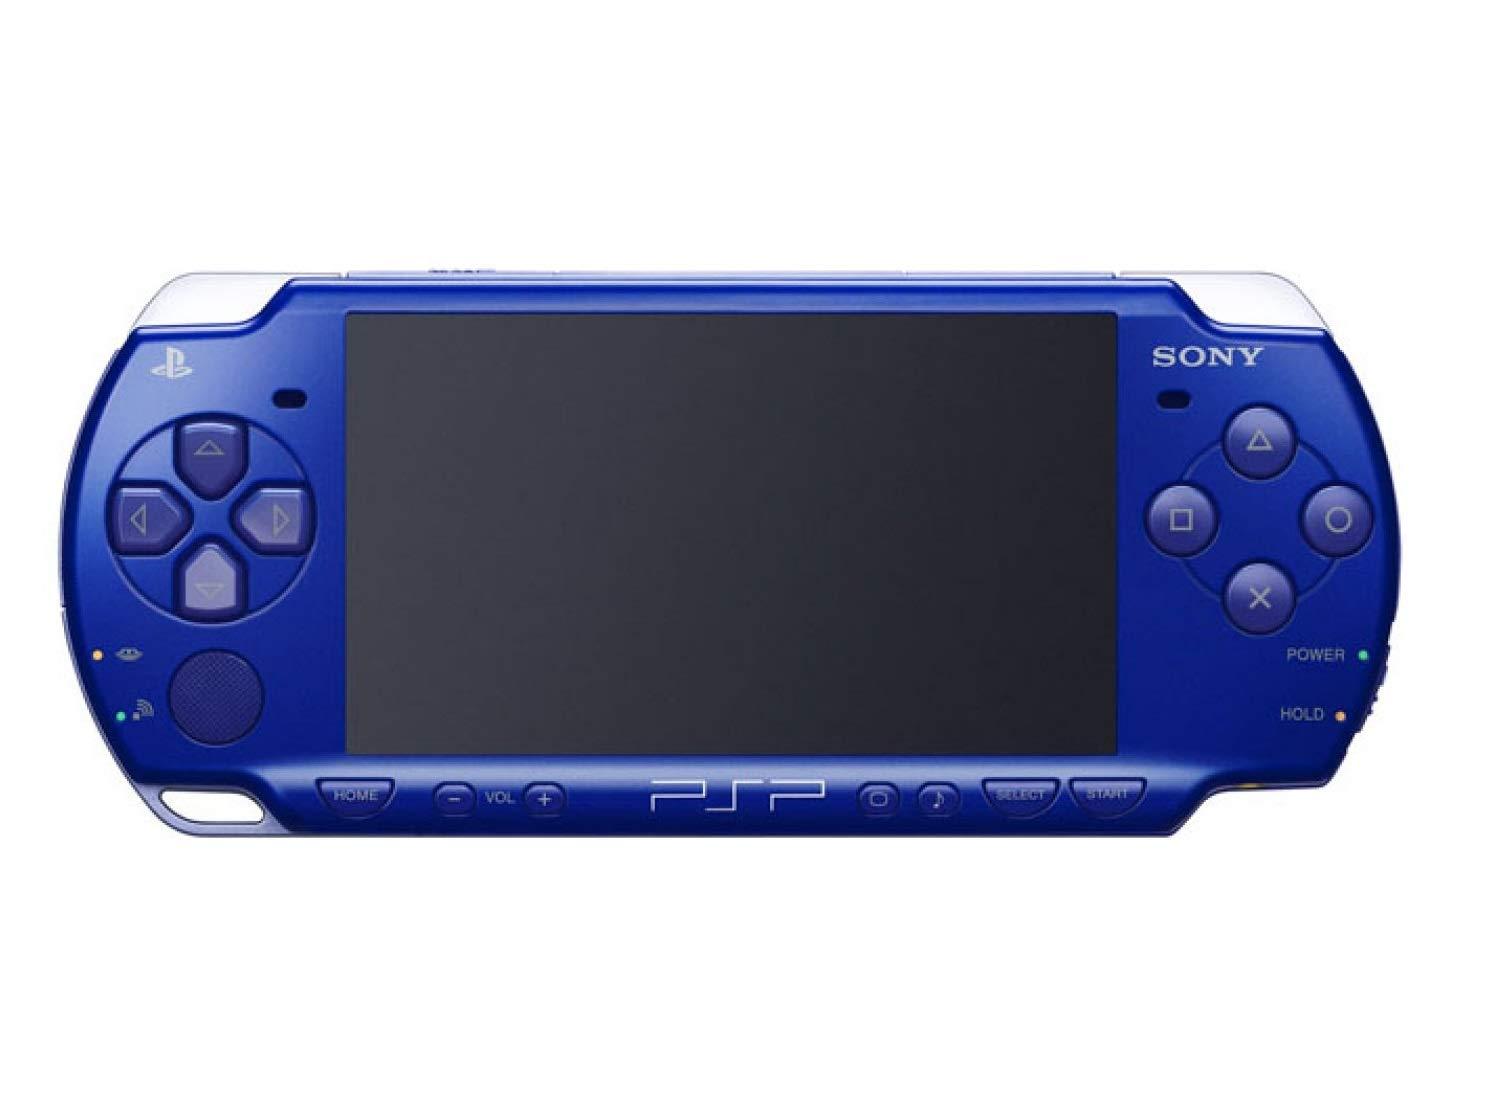 psp sony video game